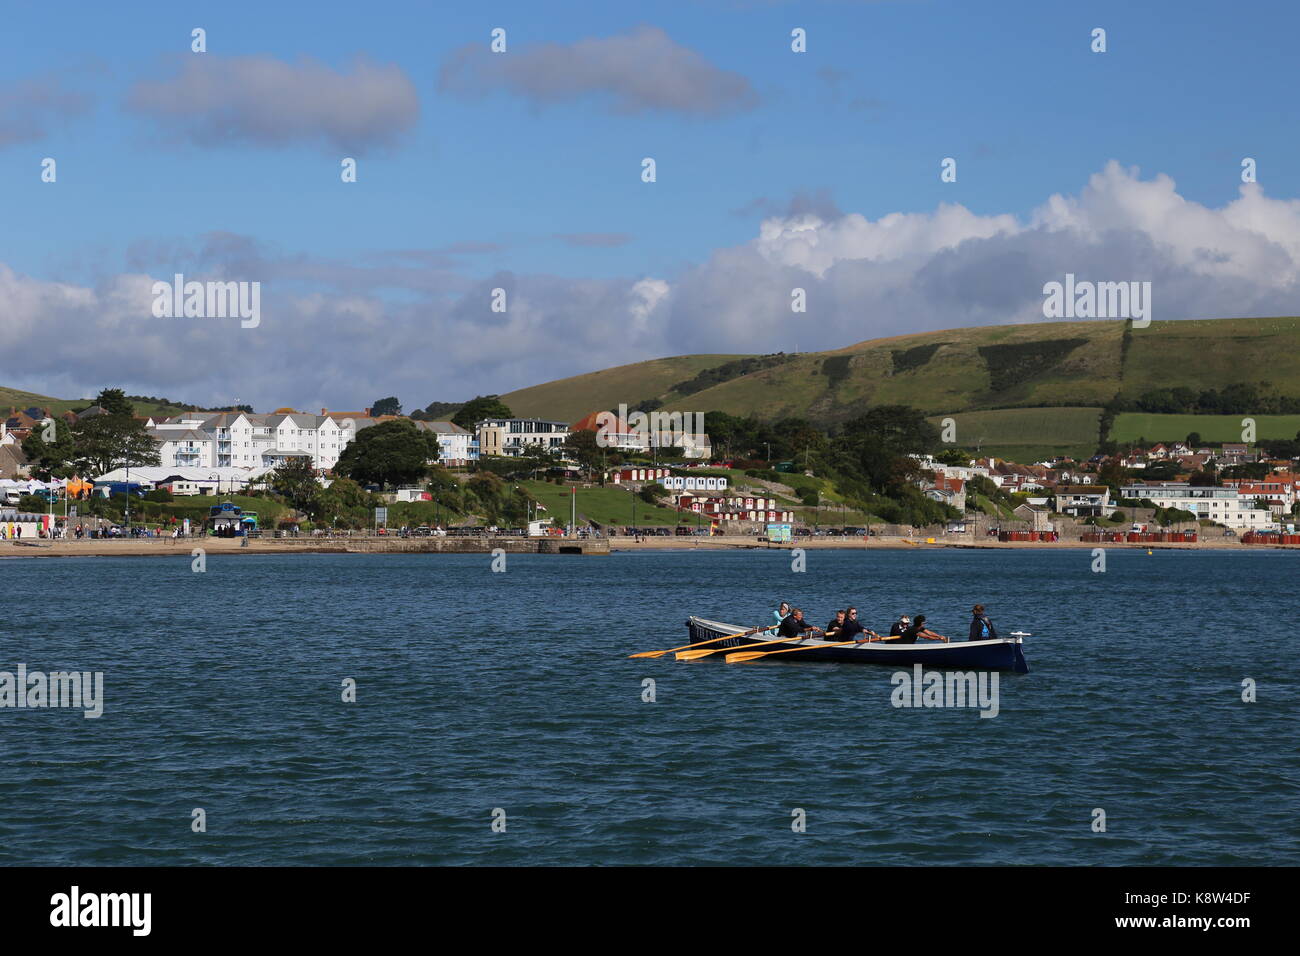 Swanage Sea Rowing Club 'Tilly Whim' pilot gig in Swanage Bay, Swanage, Isle of Purbeck, Dorset, England, Great Britain, United Kingdom, UK, Europe Stock Photo